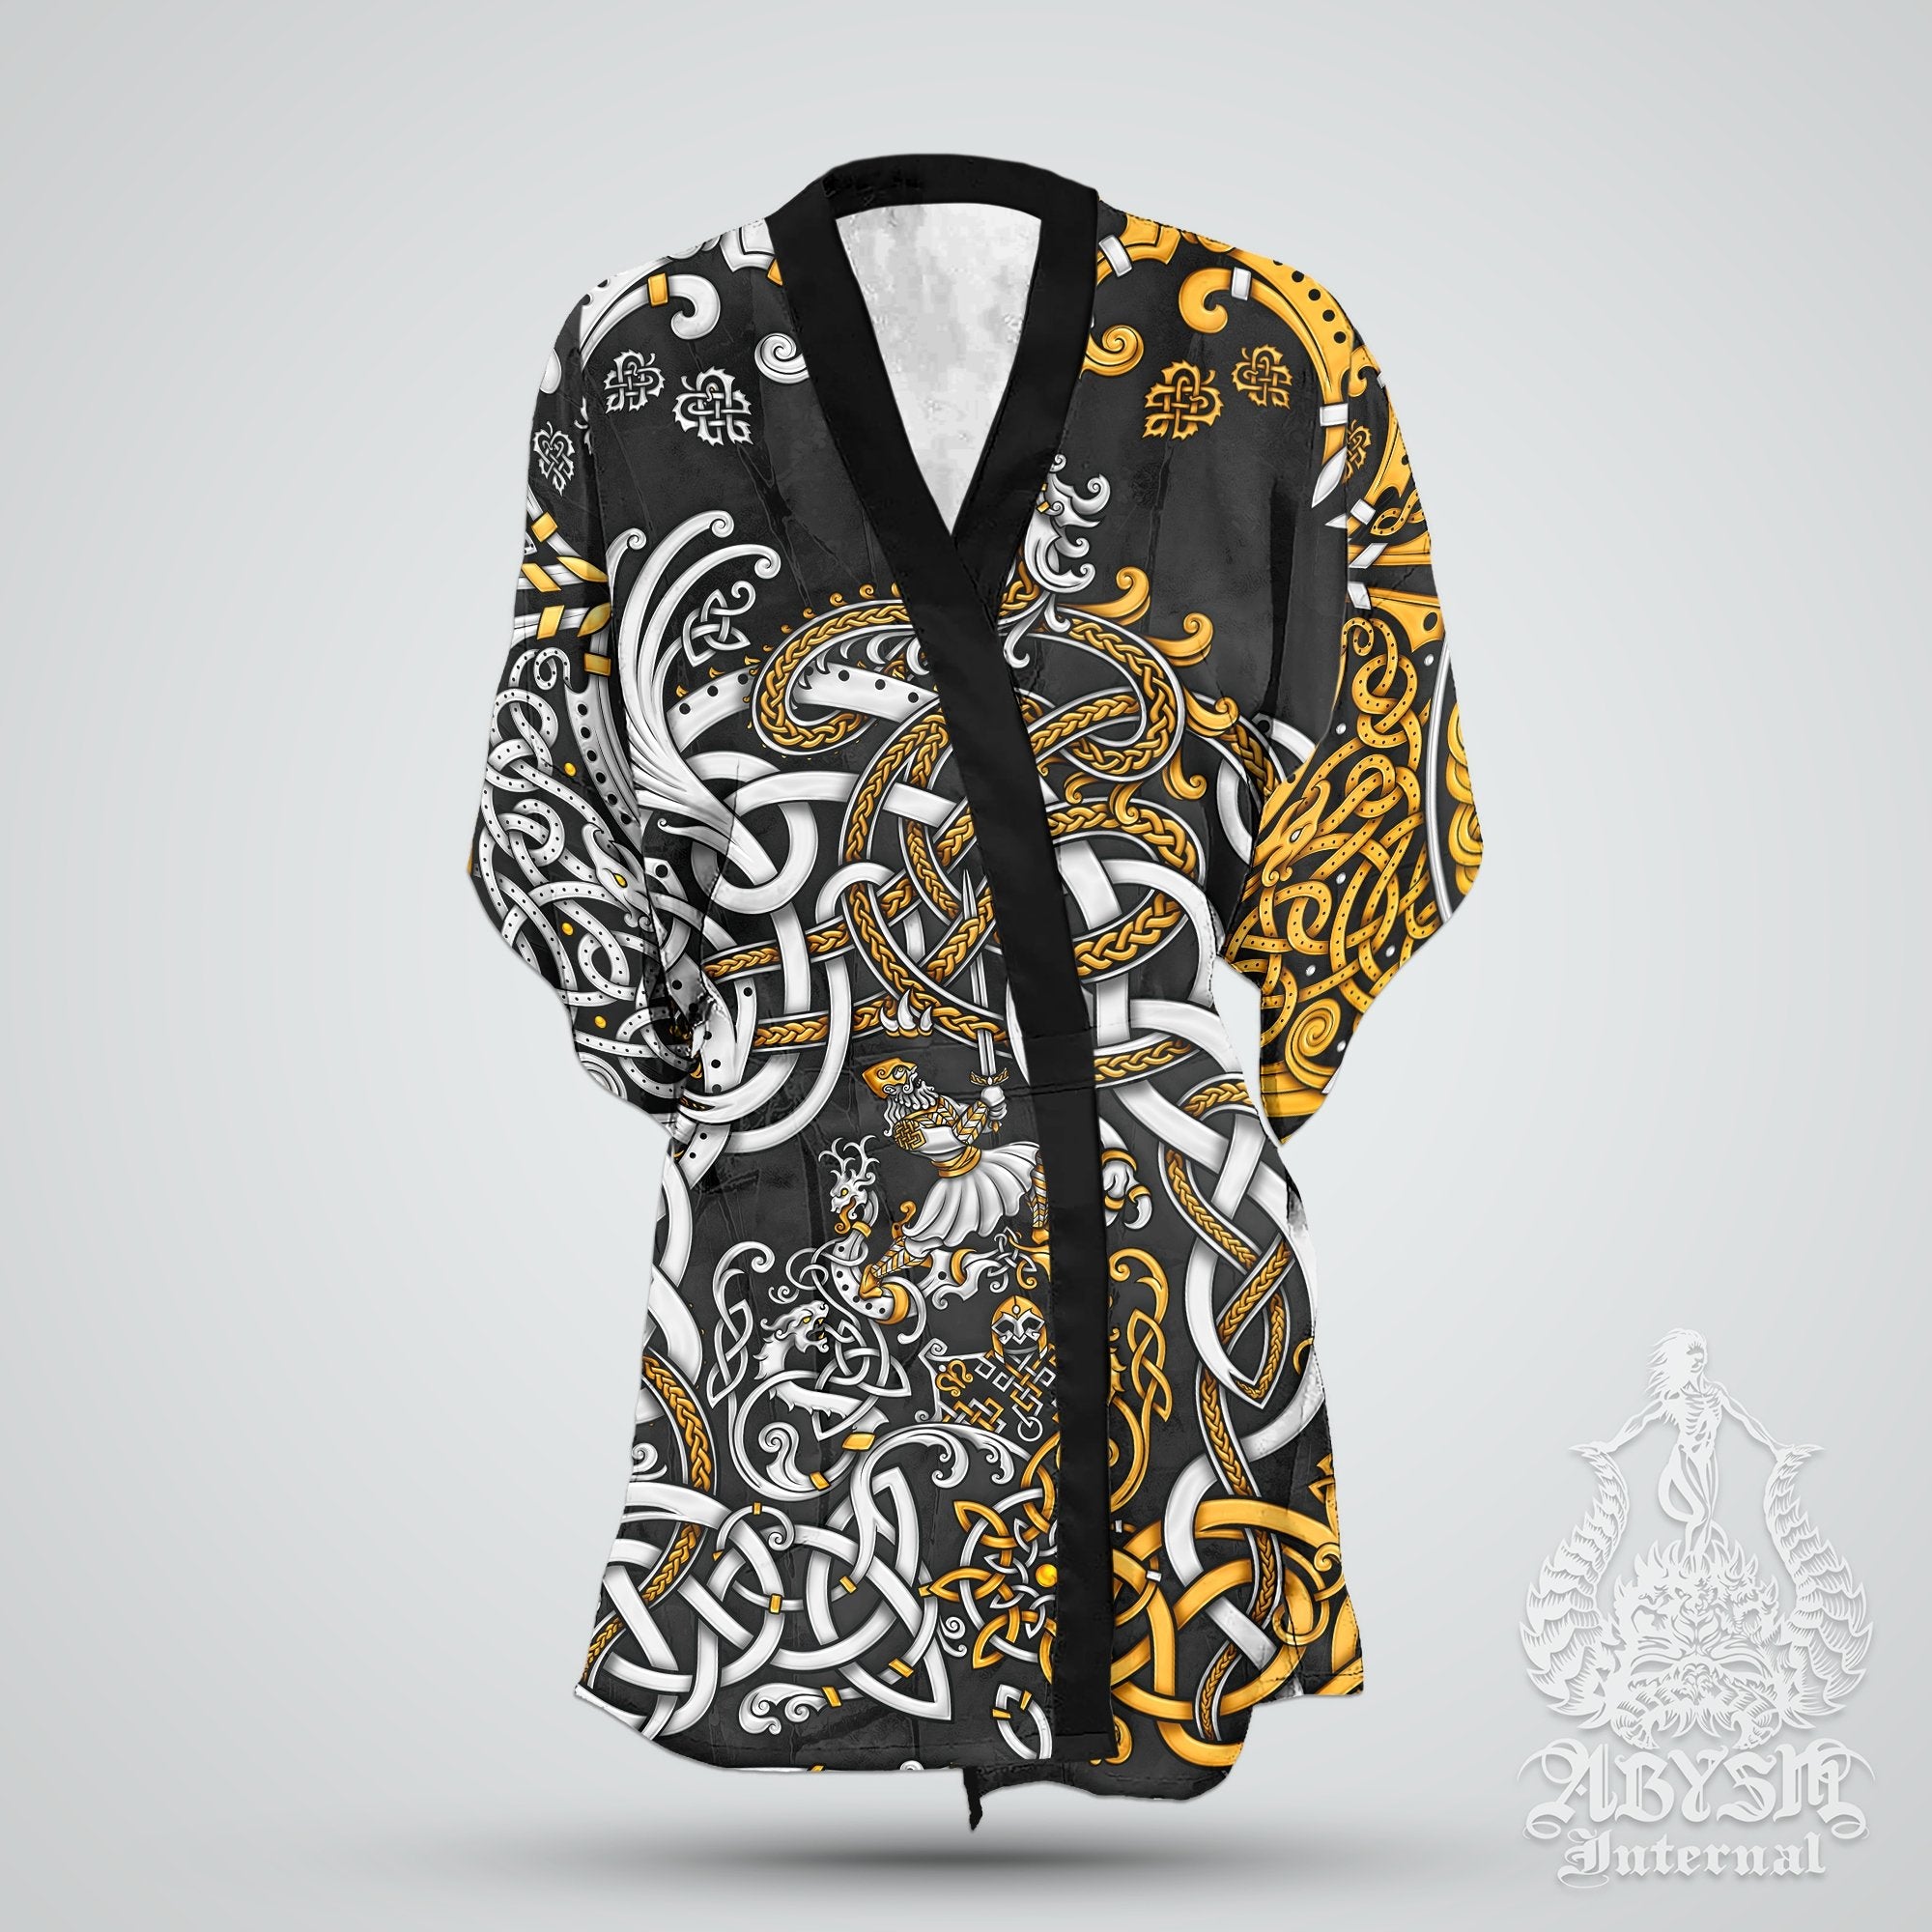 Viking Cover Up, Beach Outfit, Norse Party Kimono, Summer Festival Robe, Indie and Alternative Clothing, Unisex - Dragon Fafnir, Gold Black - Abysm Internal